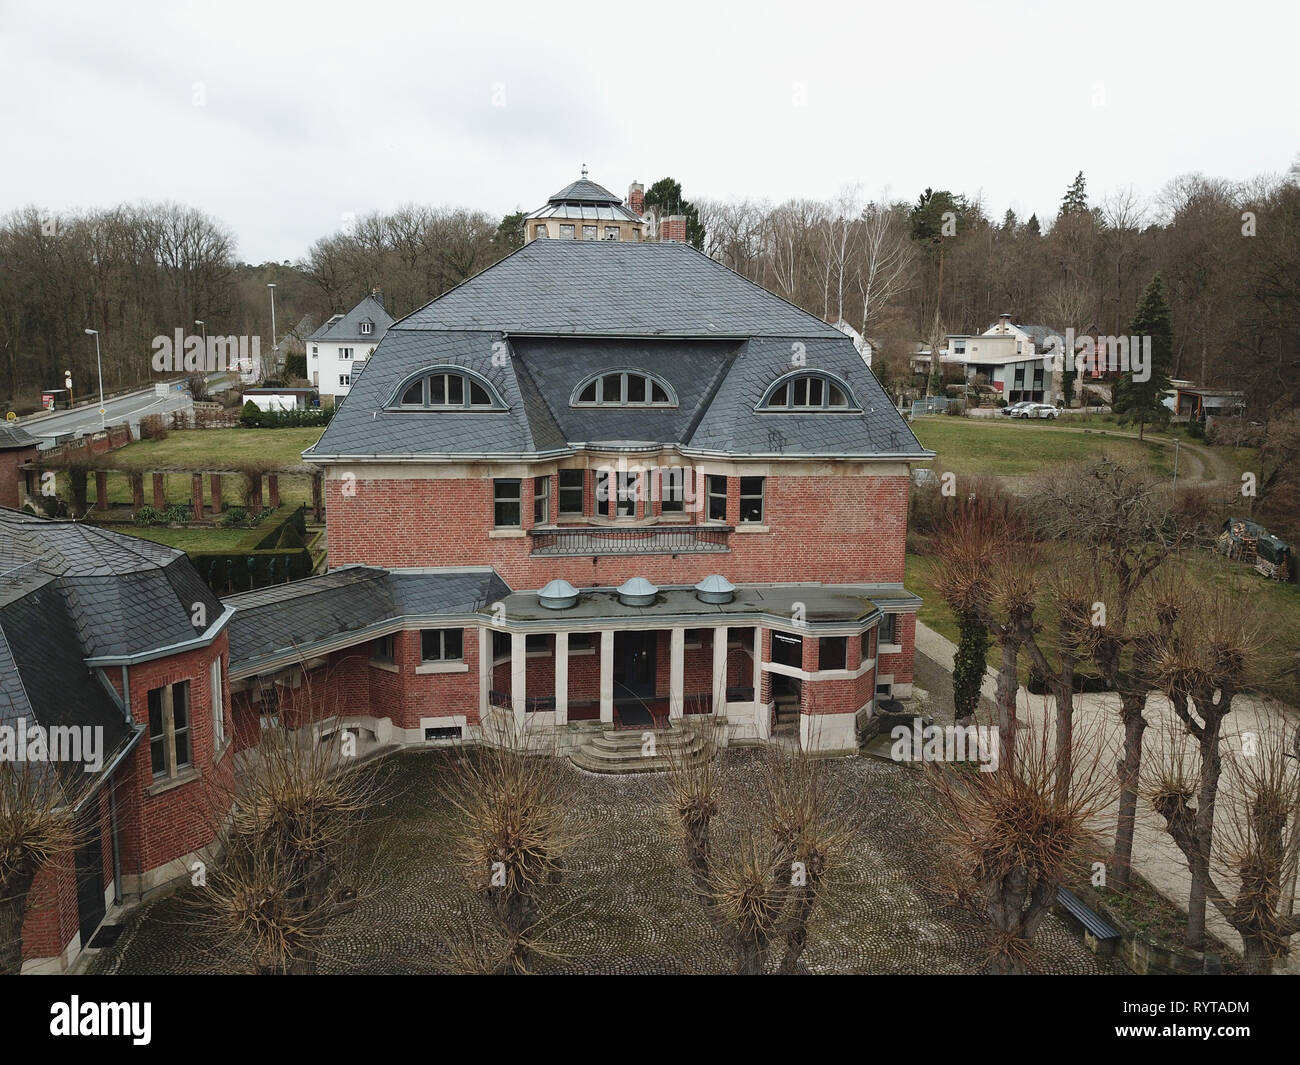 Gera, Germany. 15th Mar, 2019. The Henry van de Velde Museum - photograph with a drone). The exhibition "Henry van de Velde - Pioneer of the Bauhaus and Border